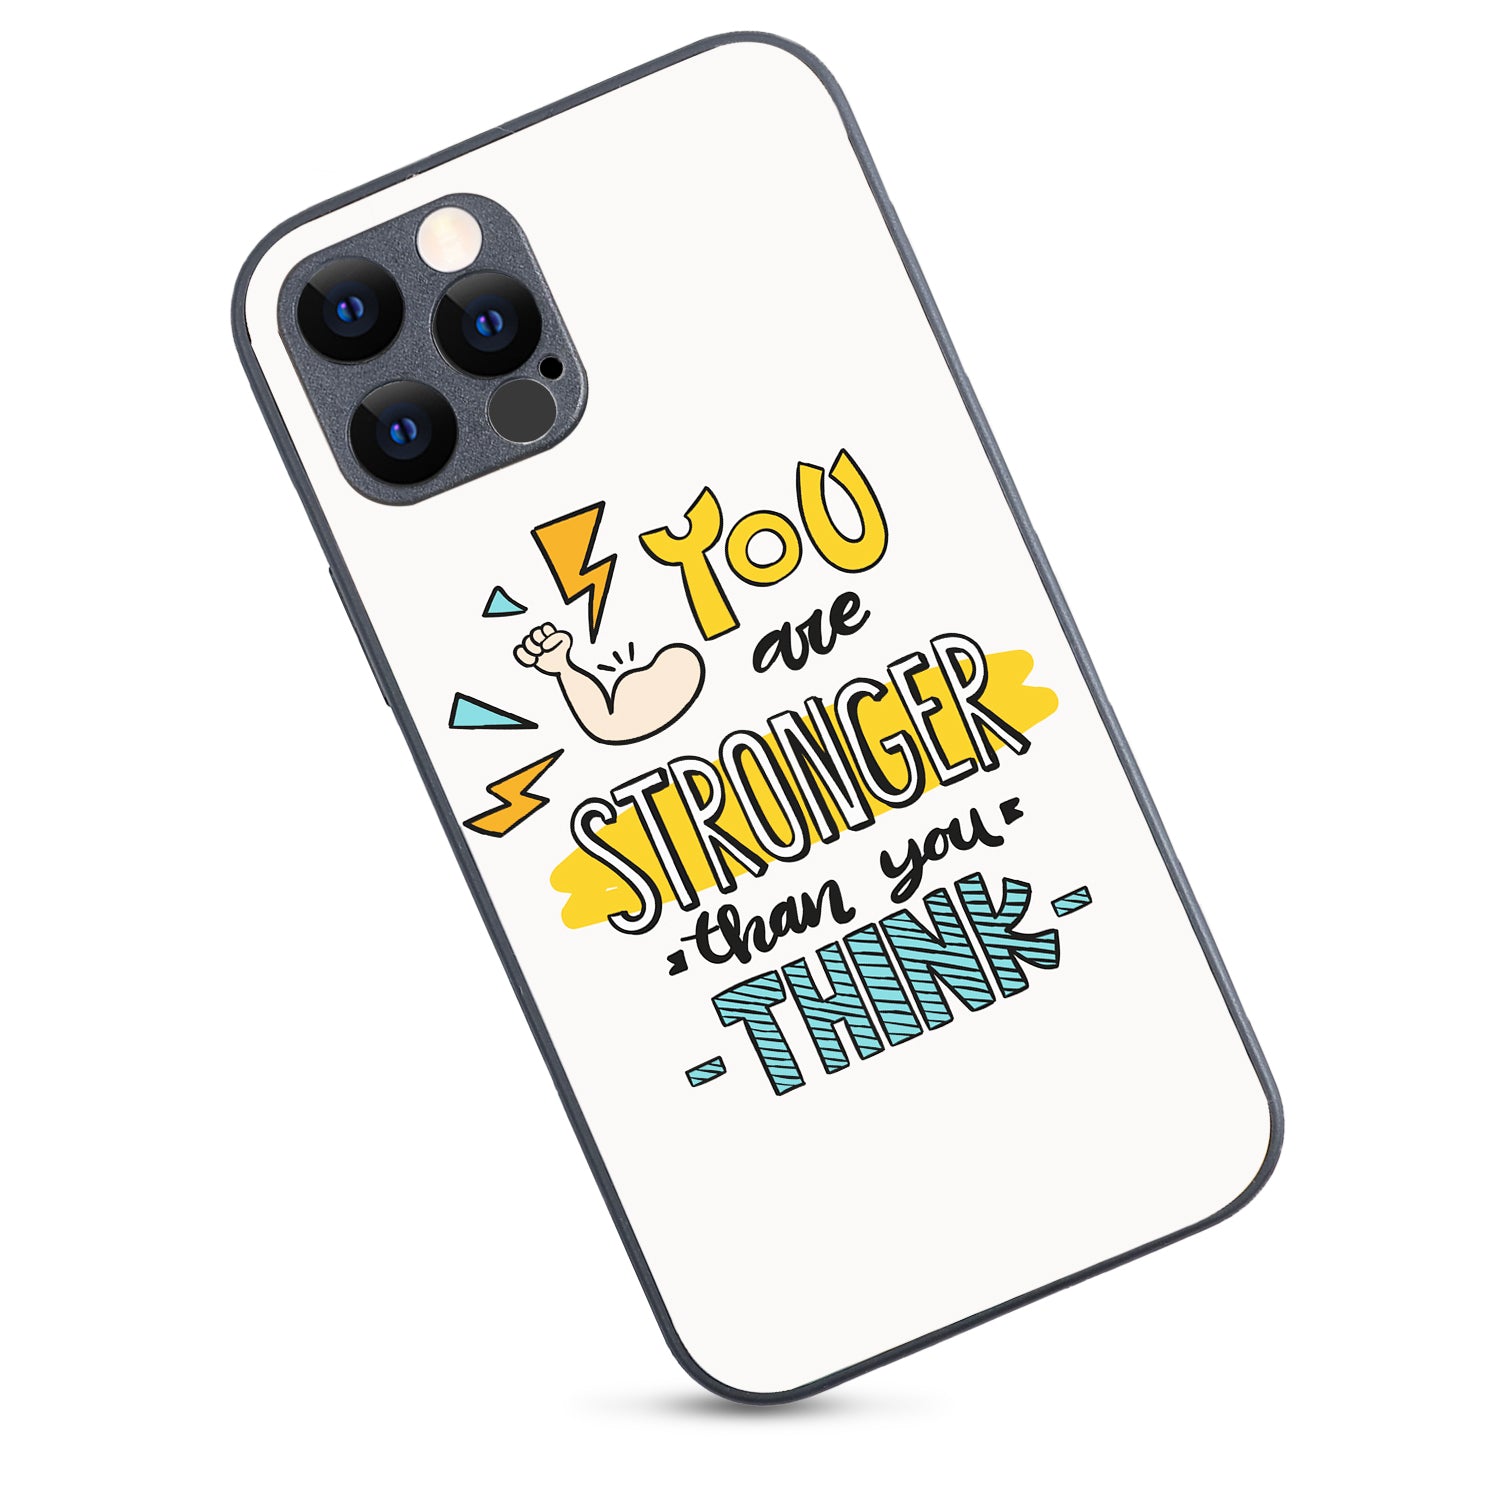 You Are Stronger Motivational Quotes iPhone 12 Pro Case